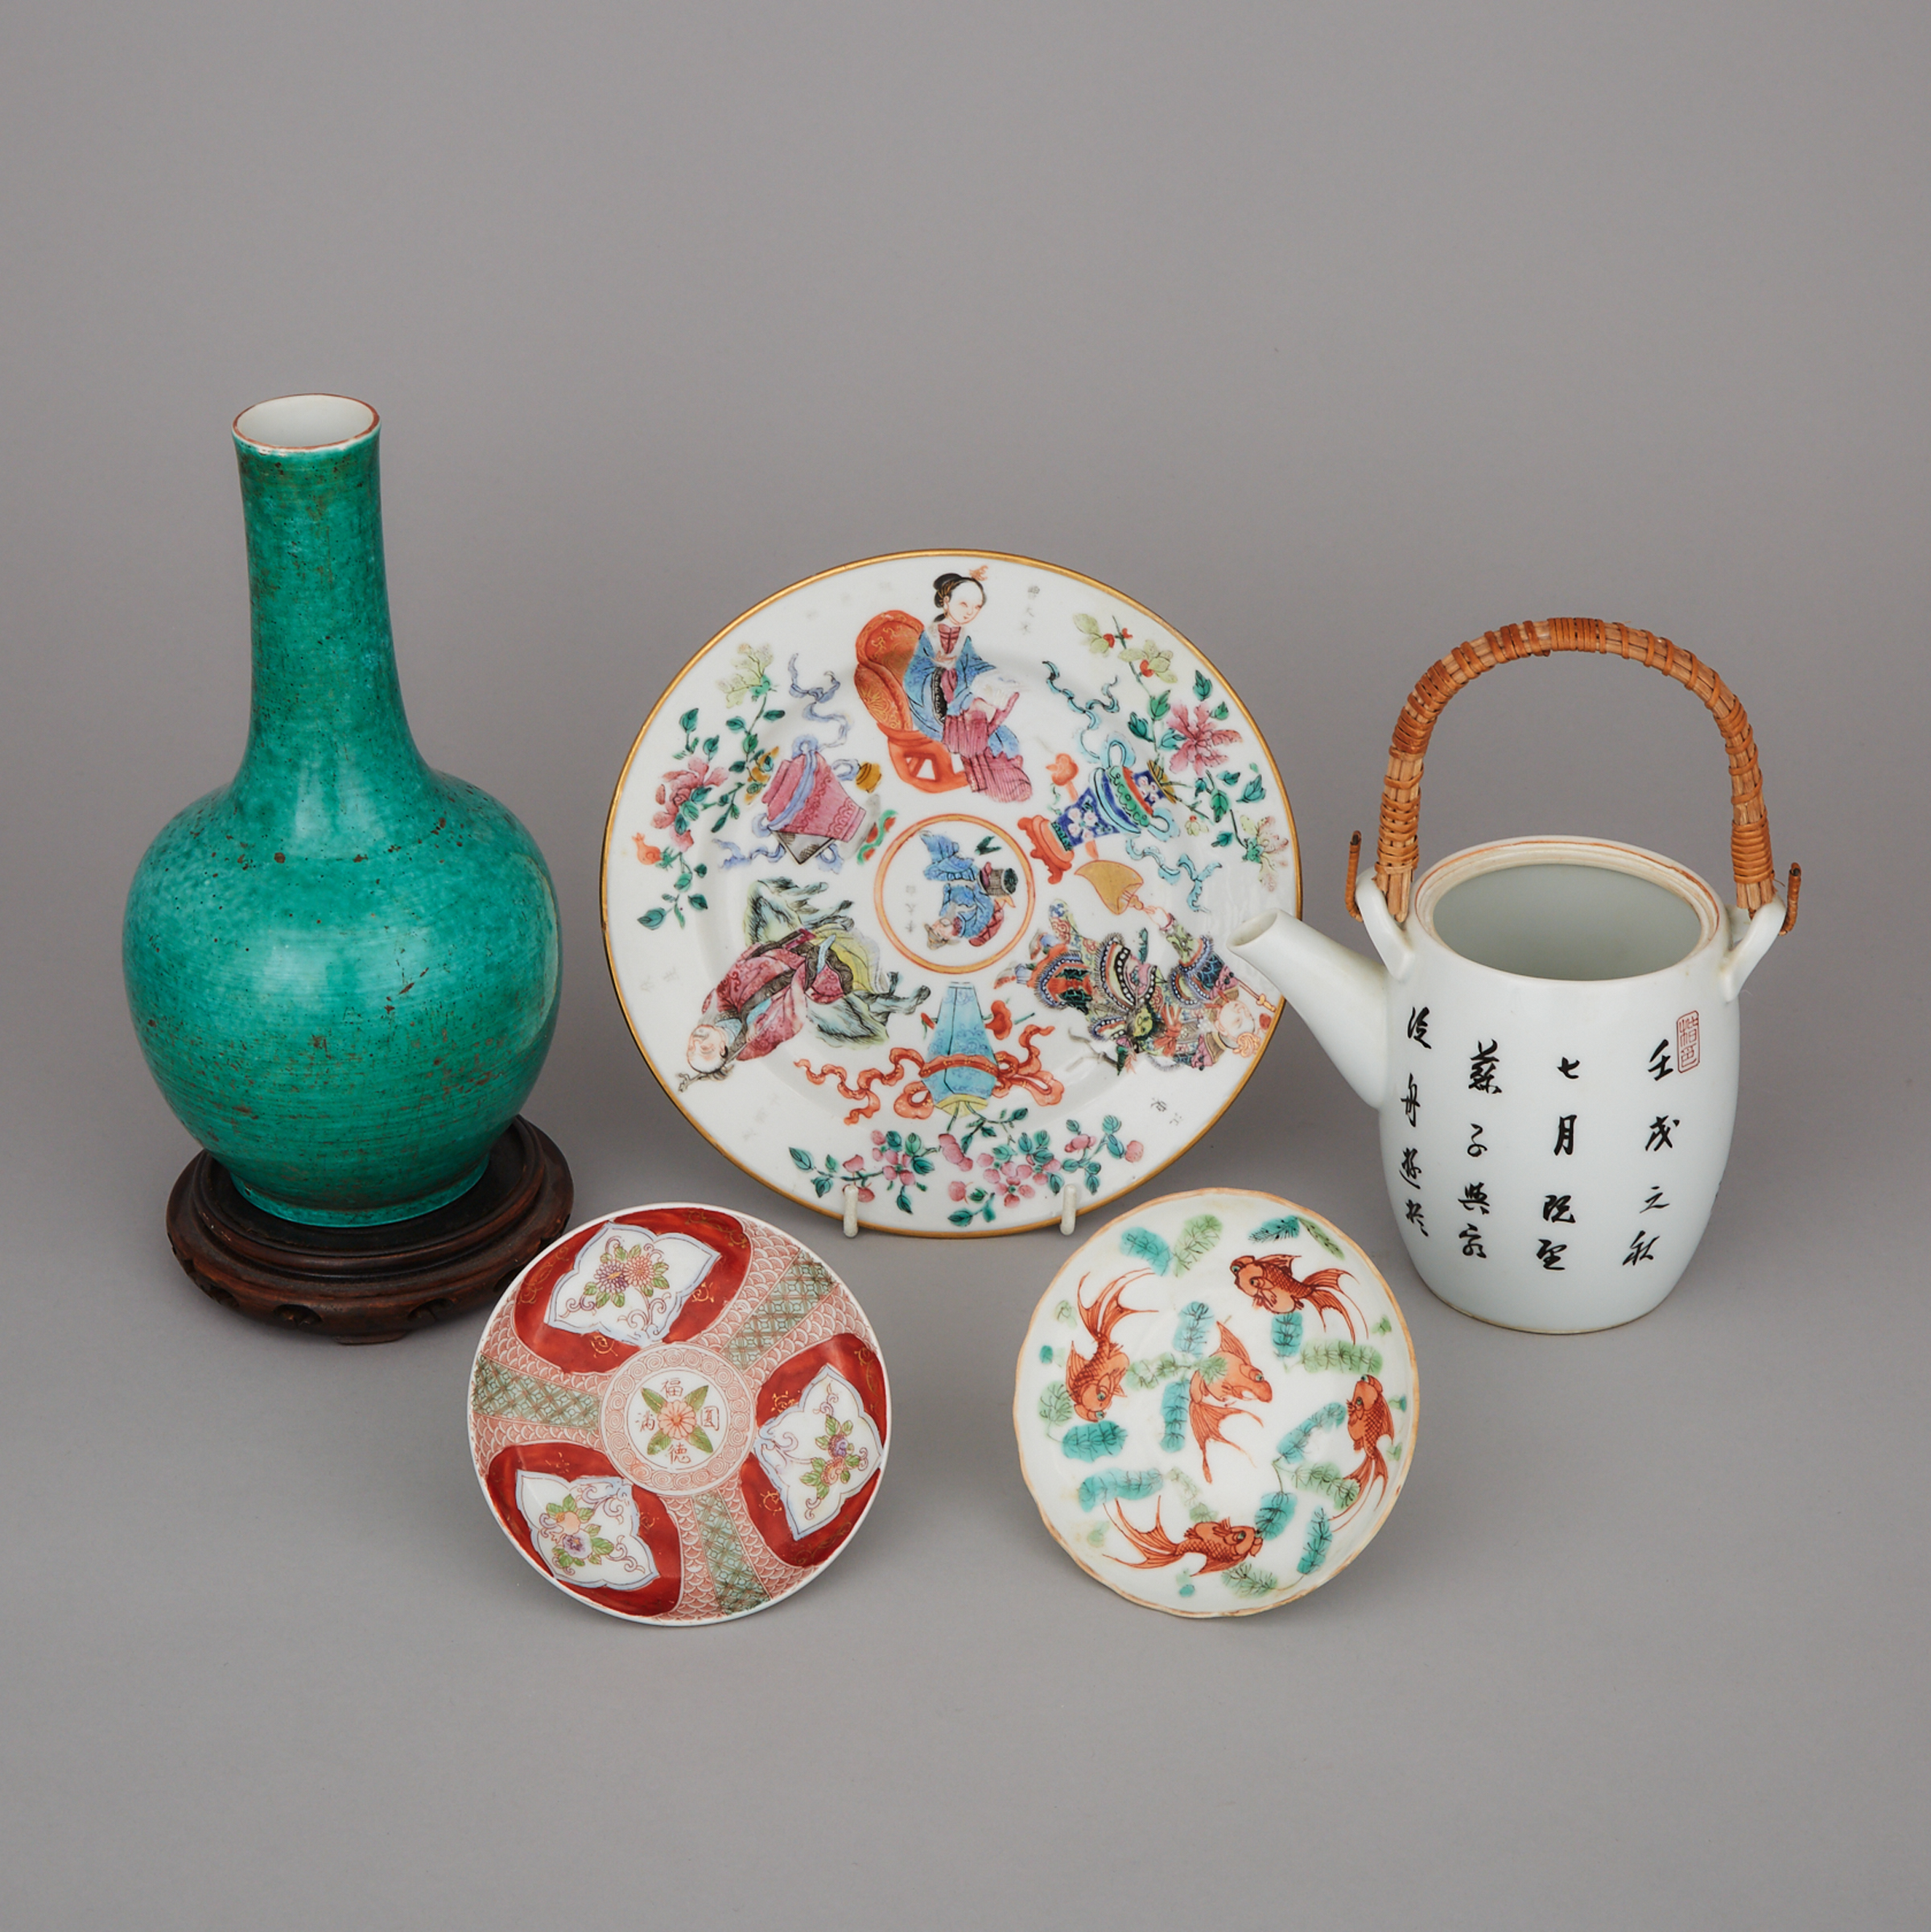 A Group of Five Porcelain Wares, 19th Century and Later